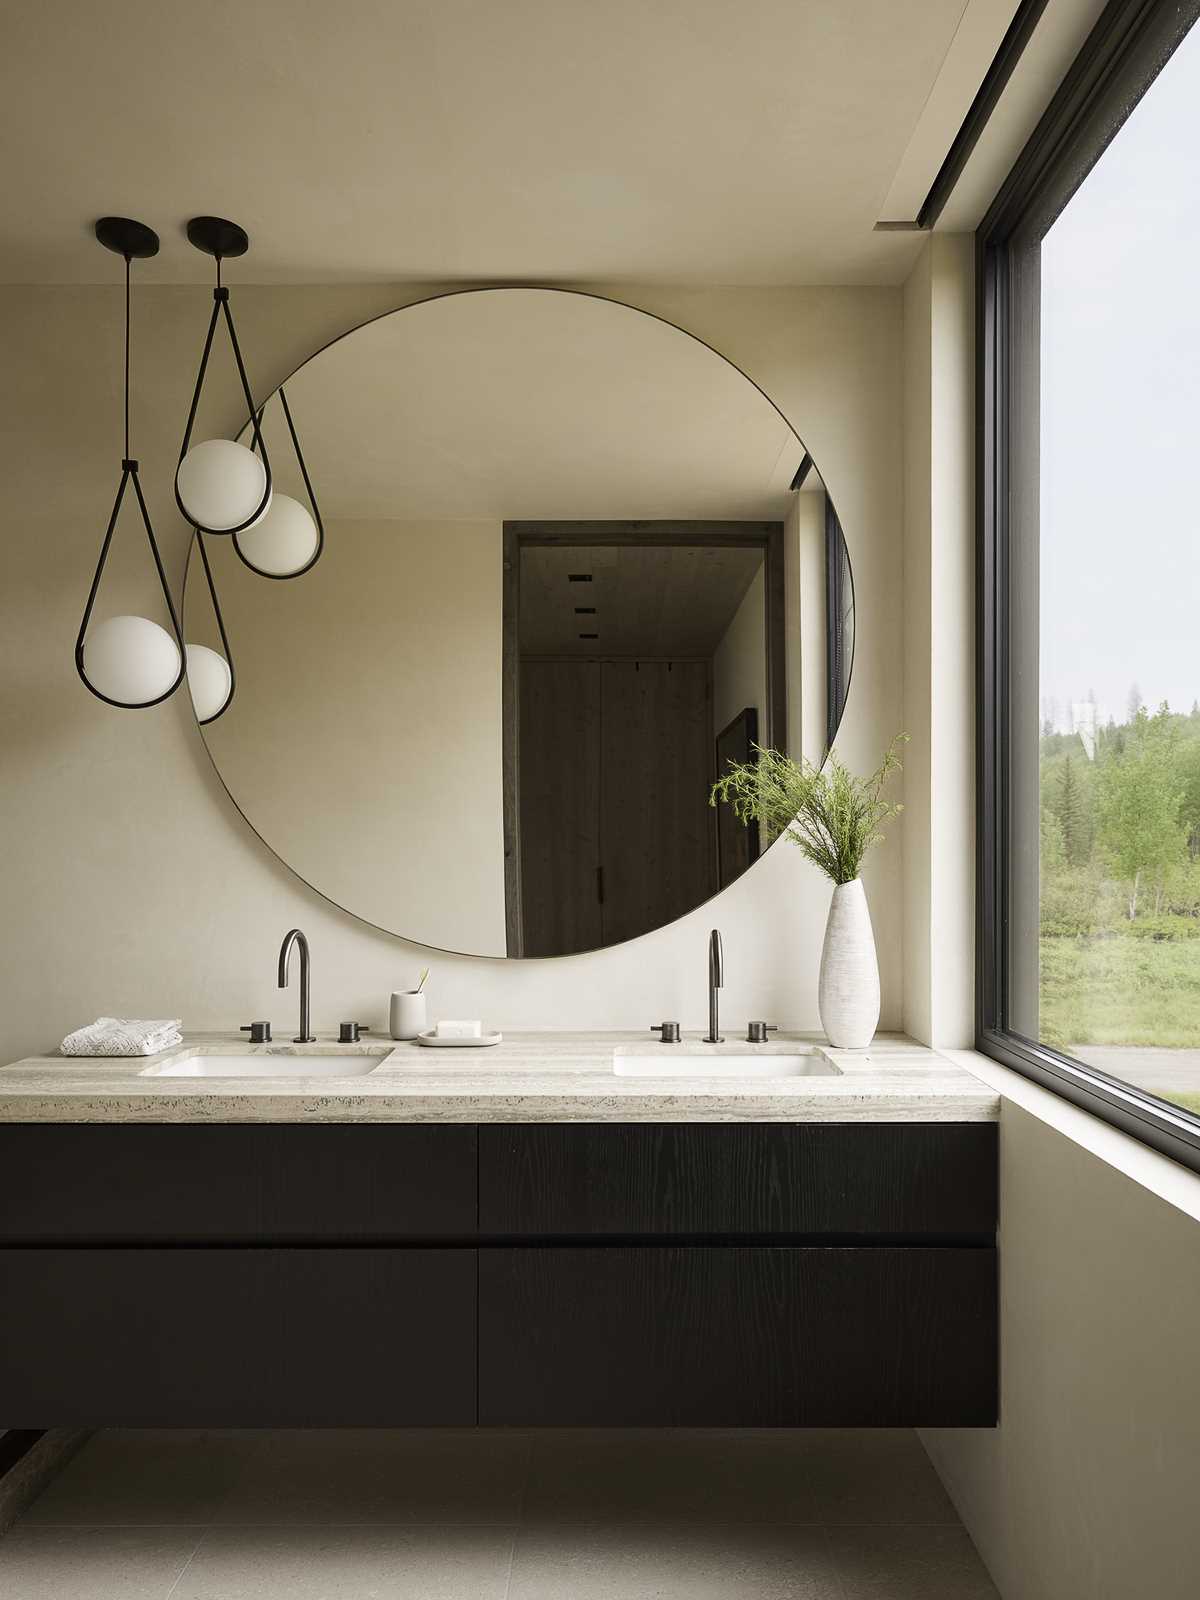 A modern bathroom with a large round mirror.